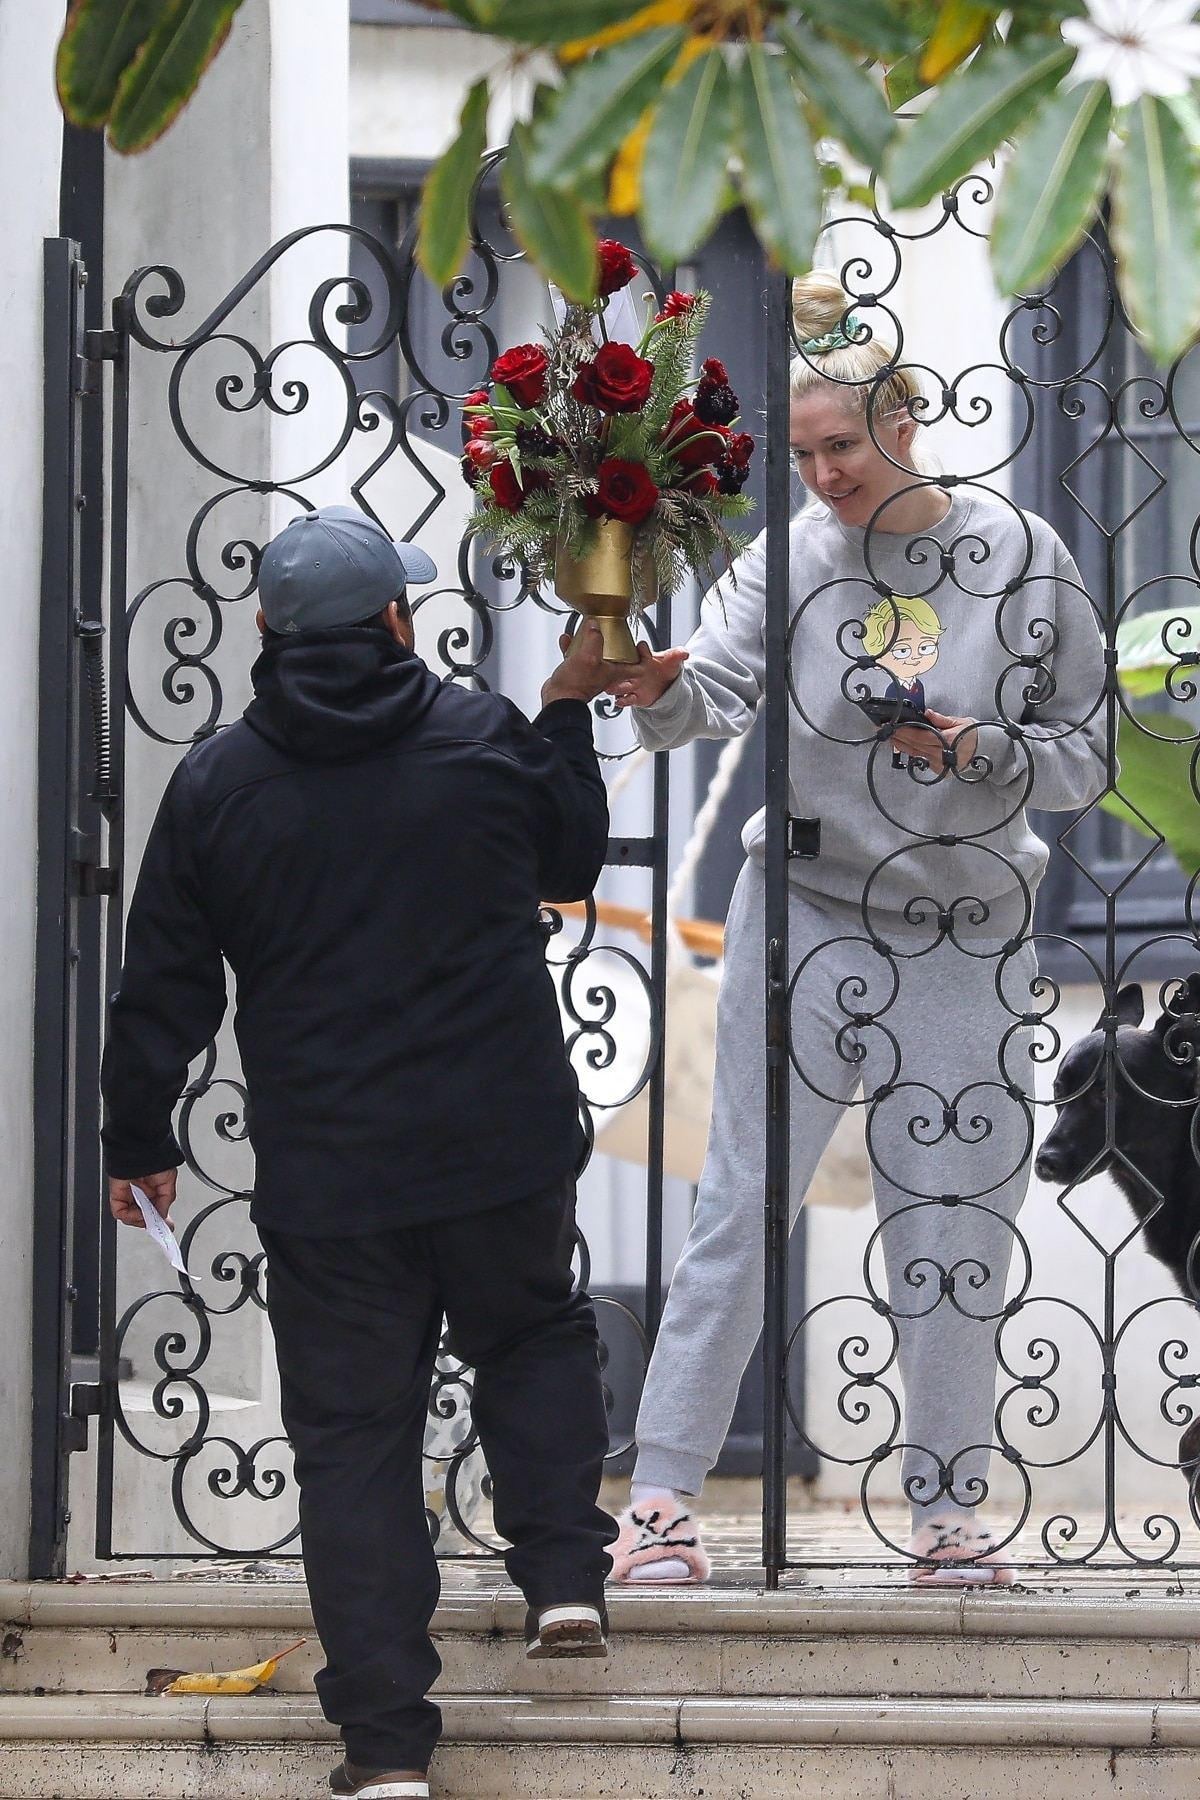 RHOBH star Erika Jayne receives flowers at her Los Angeles home after a positive COVID-19 diagnosis